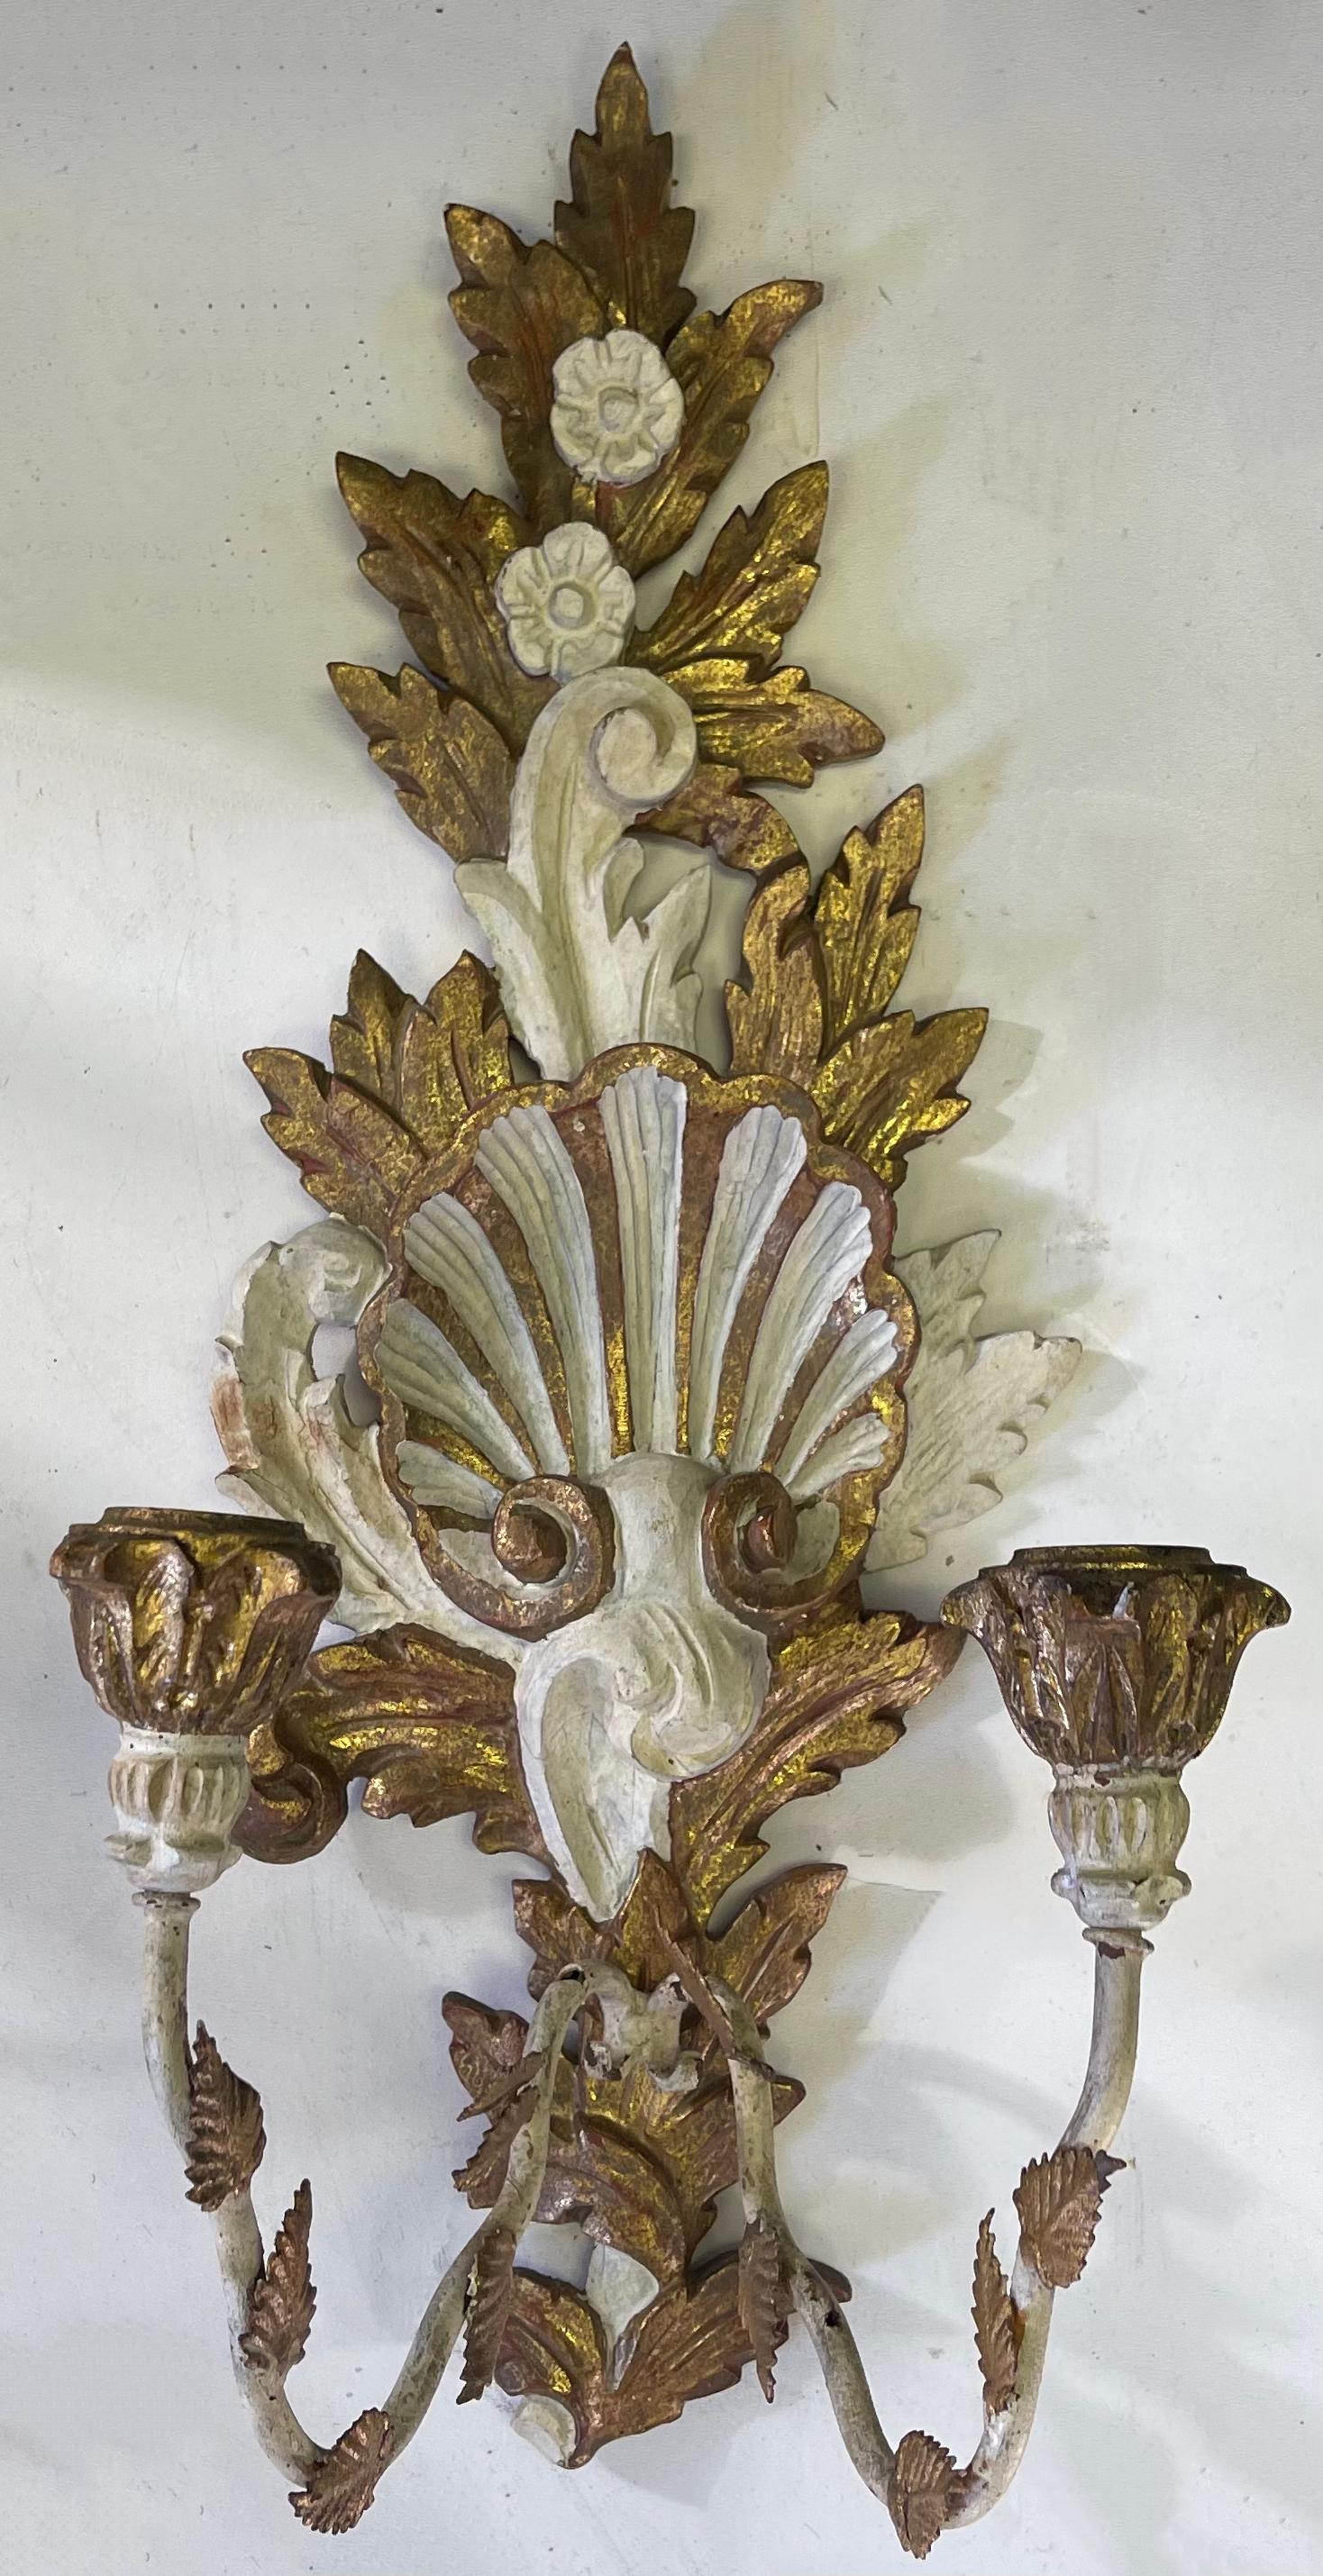 20th Century Italian Giltwood And Painted Carved Sconces With Shell And Floral Motif, Pair For Sale